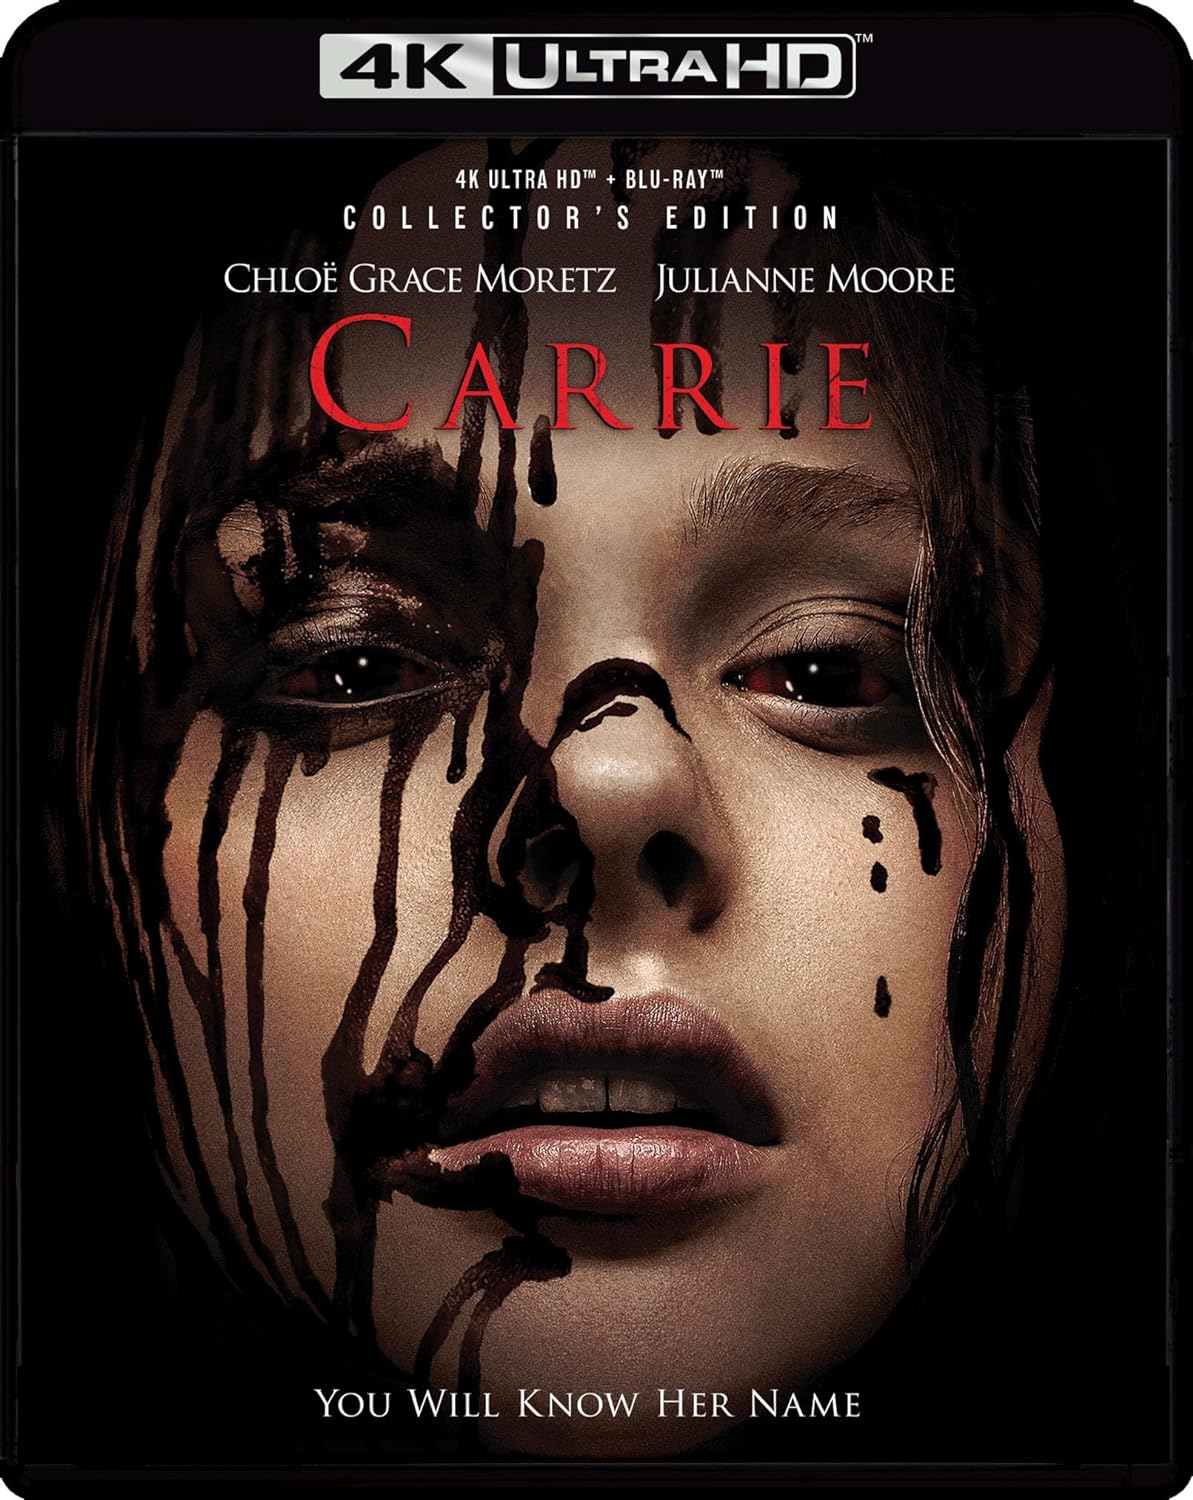 Carrie (2013) 4K UHD + Blu-ray Collector's Edition with Slipcover (Scream Factory) [Preorder]